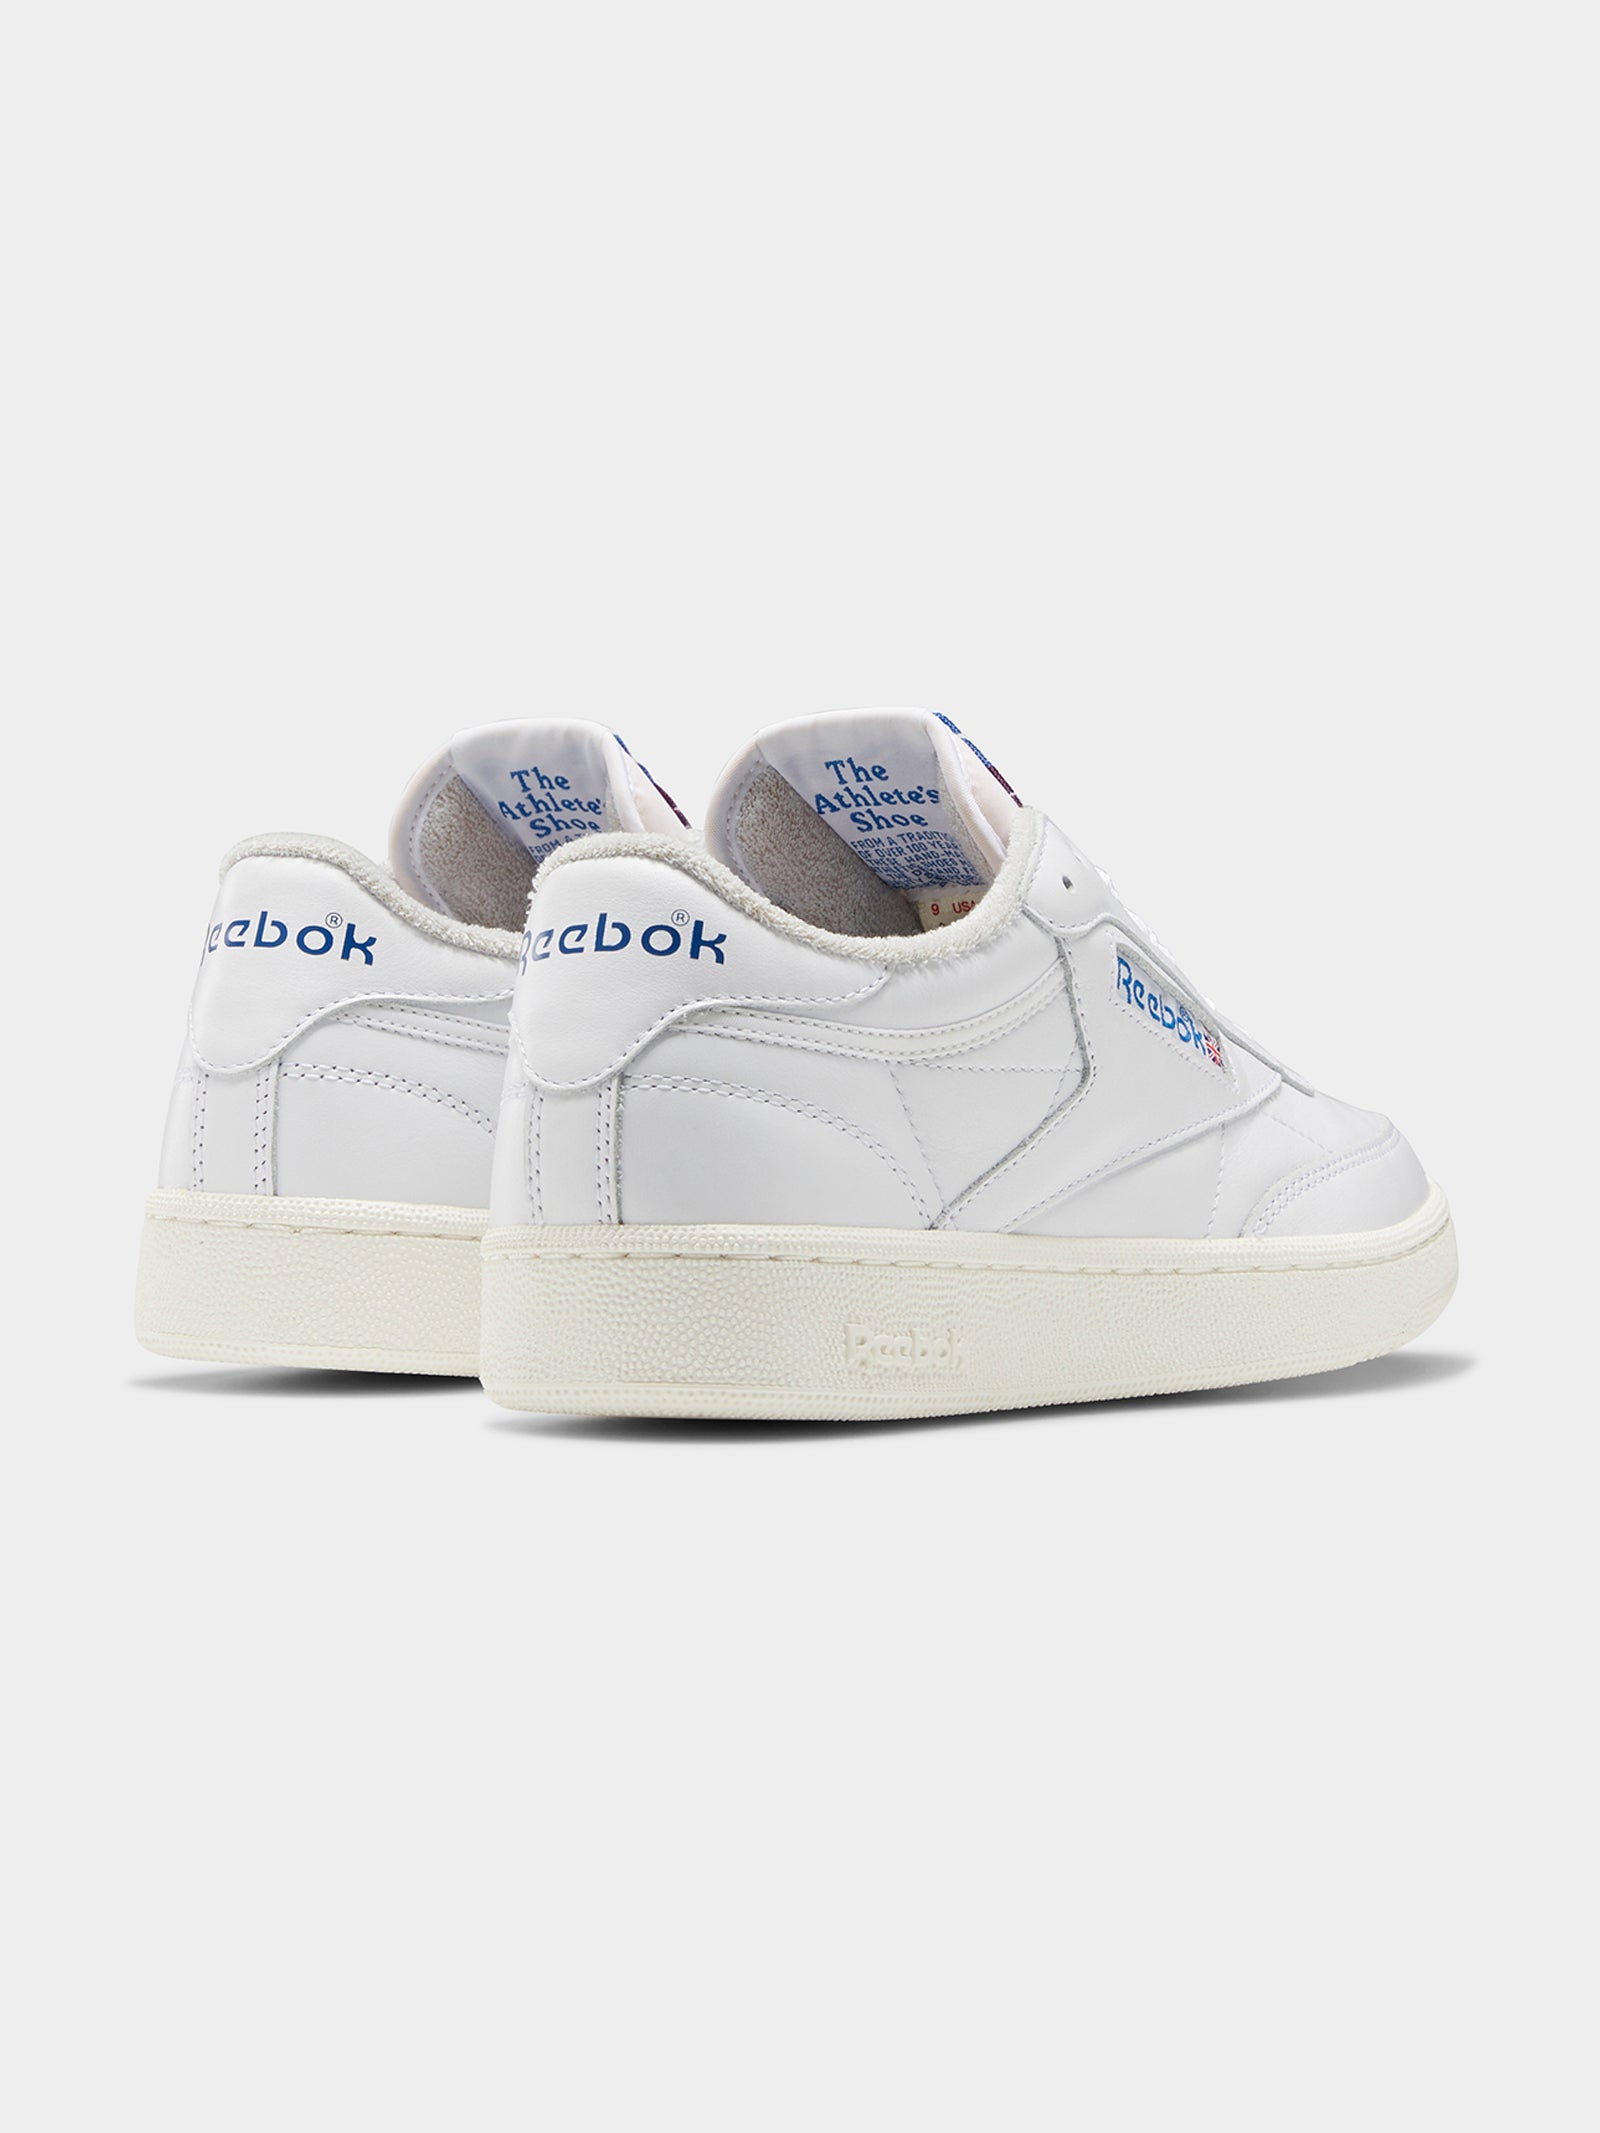 Mens Club C 85 Sneakers in White, Chalk & Vector Blue